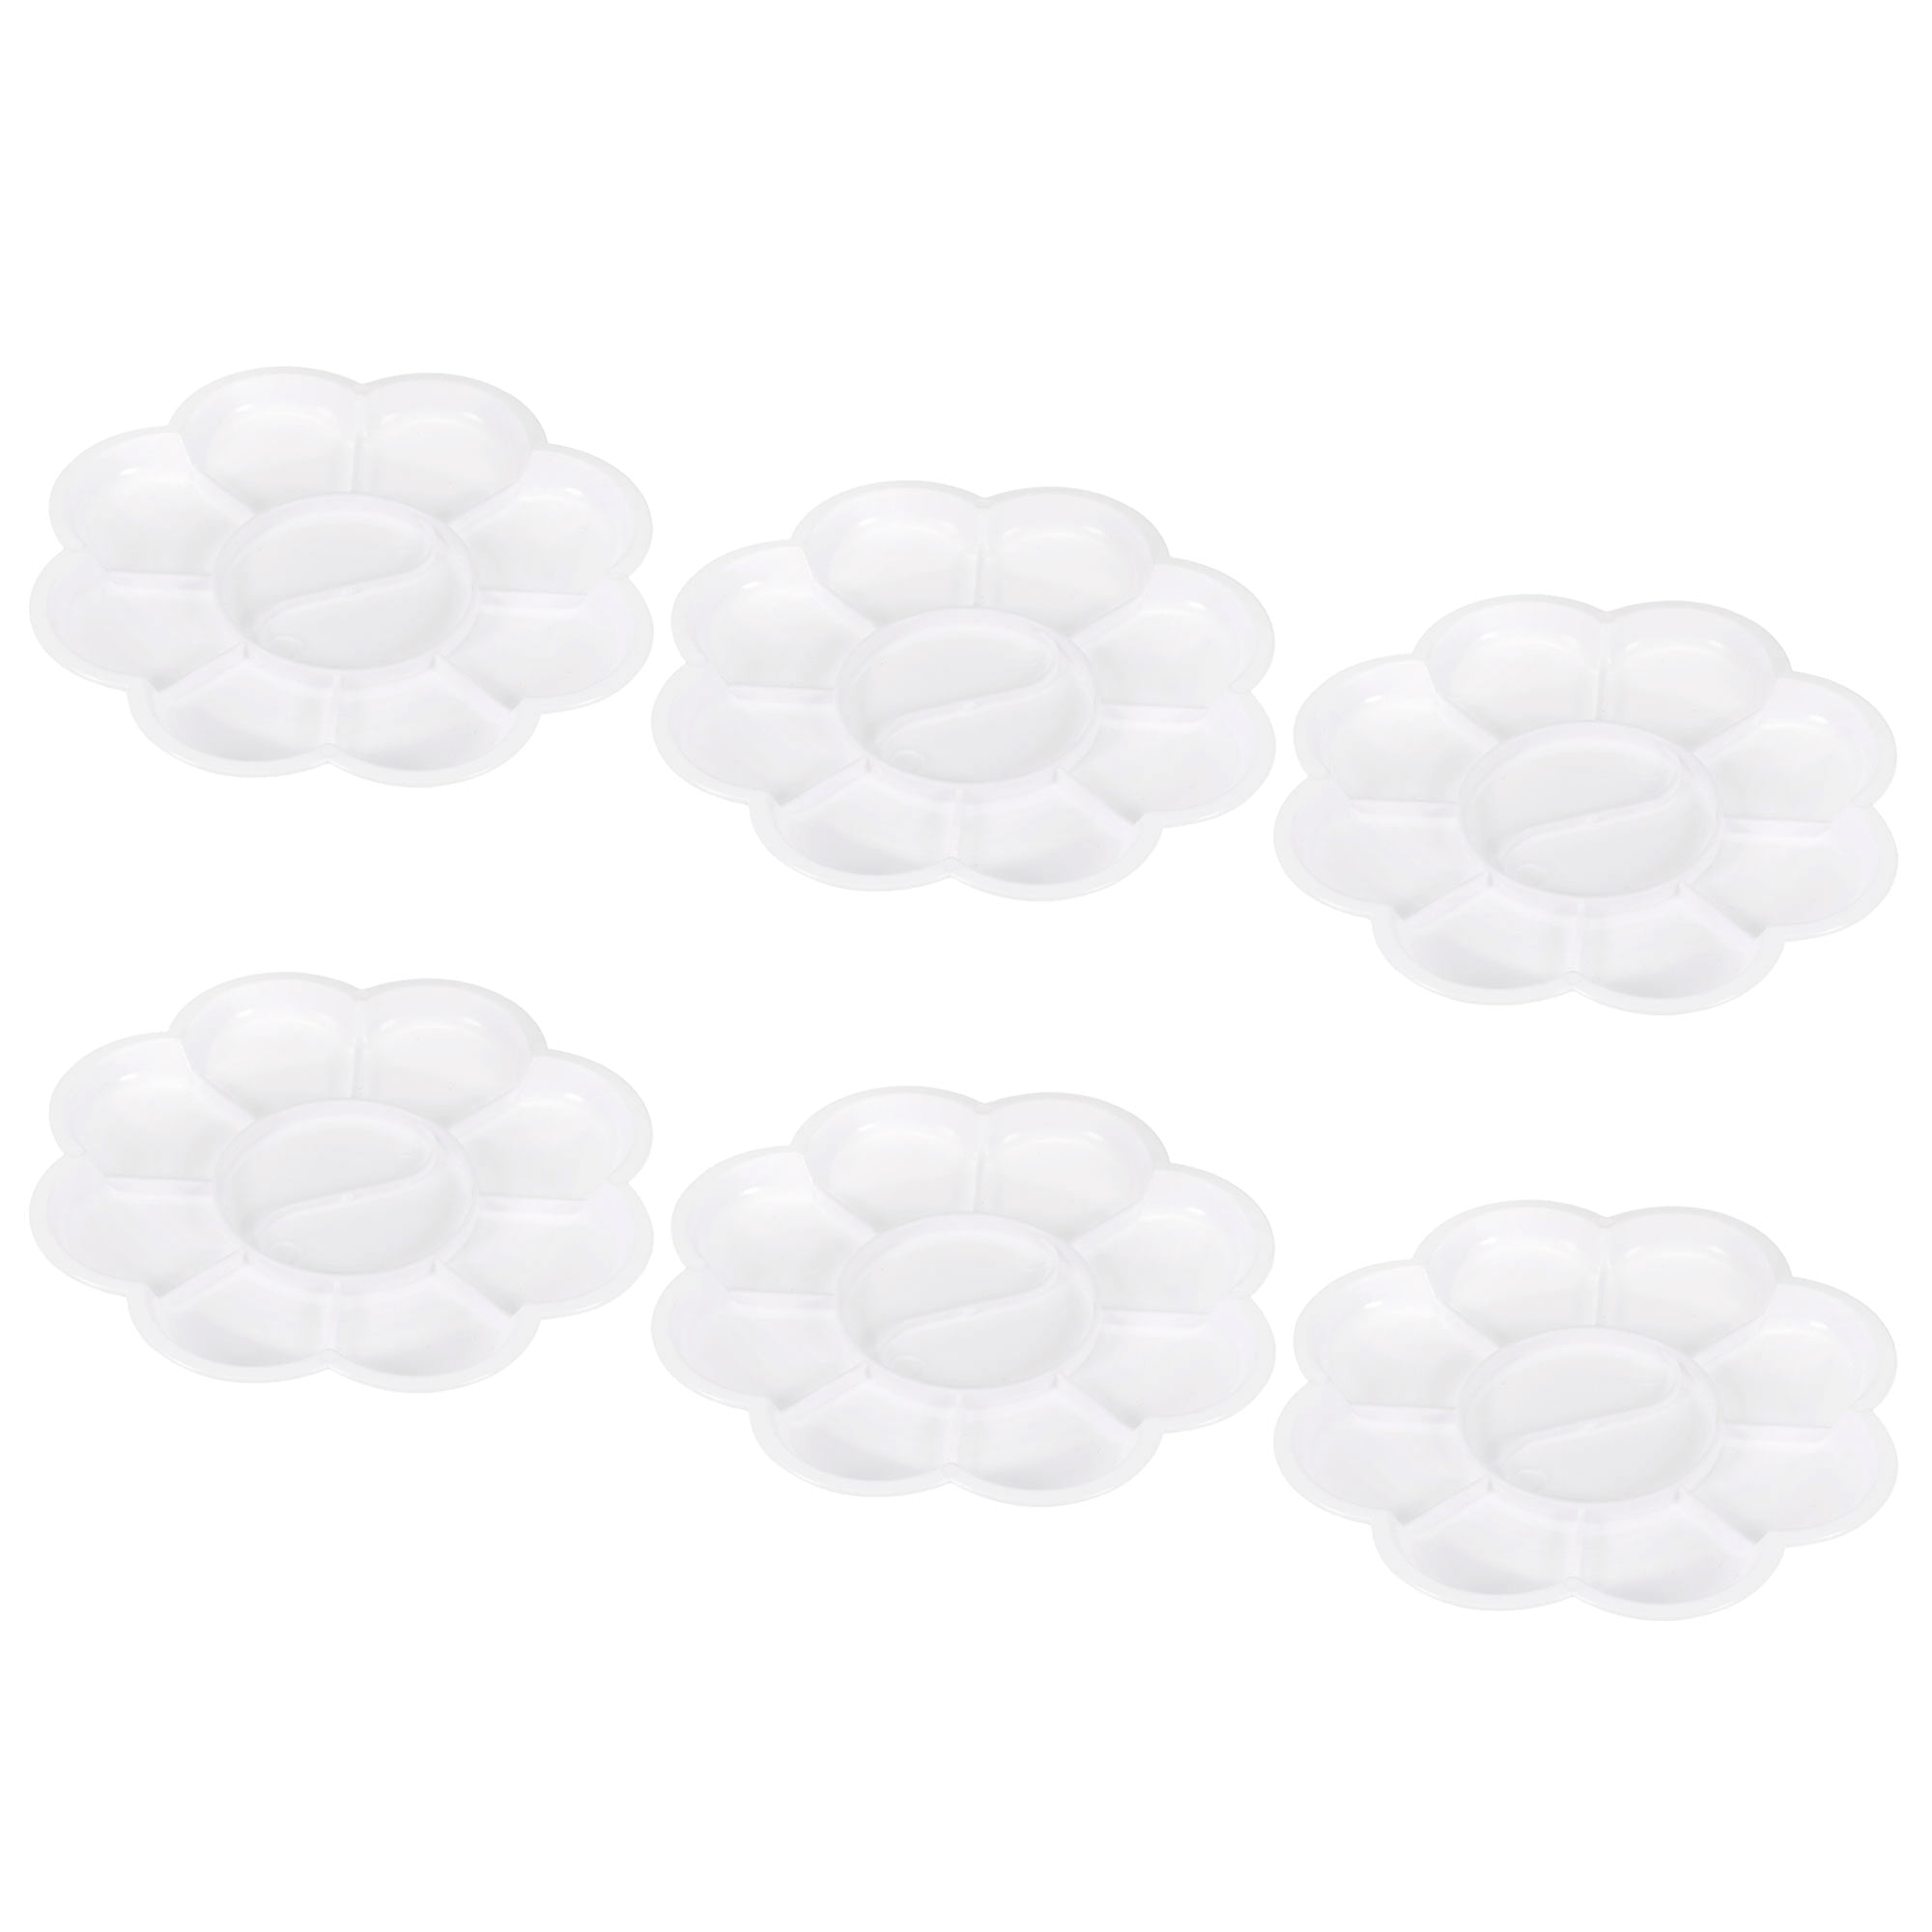 U.S. Art Supply 9 x 11.8 Clear Oval-Shaped Acrylic Painting Palette (Pack  of 2) - Transparent Plastic Artist Paint Color Mixing Trays - Non-Stick,  Easy Clean, Mix Acrylic, Oil - Adults Kids